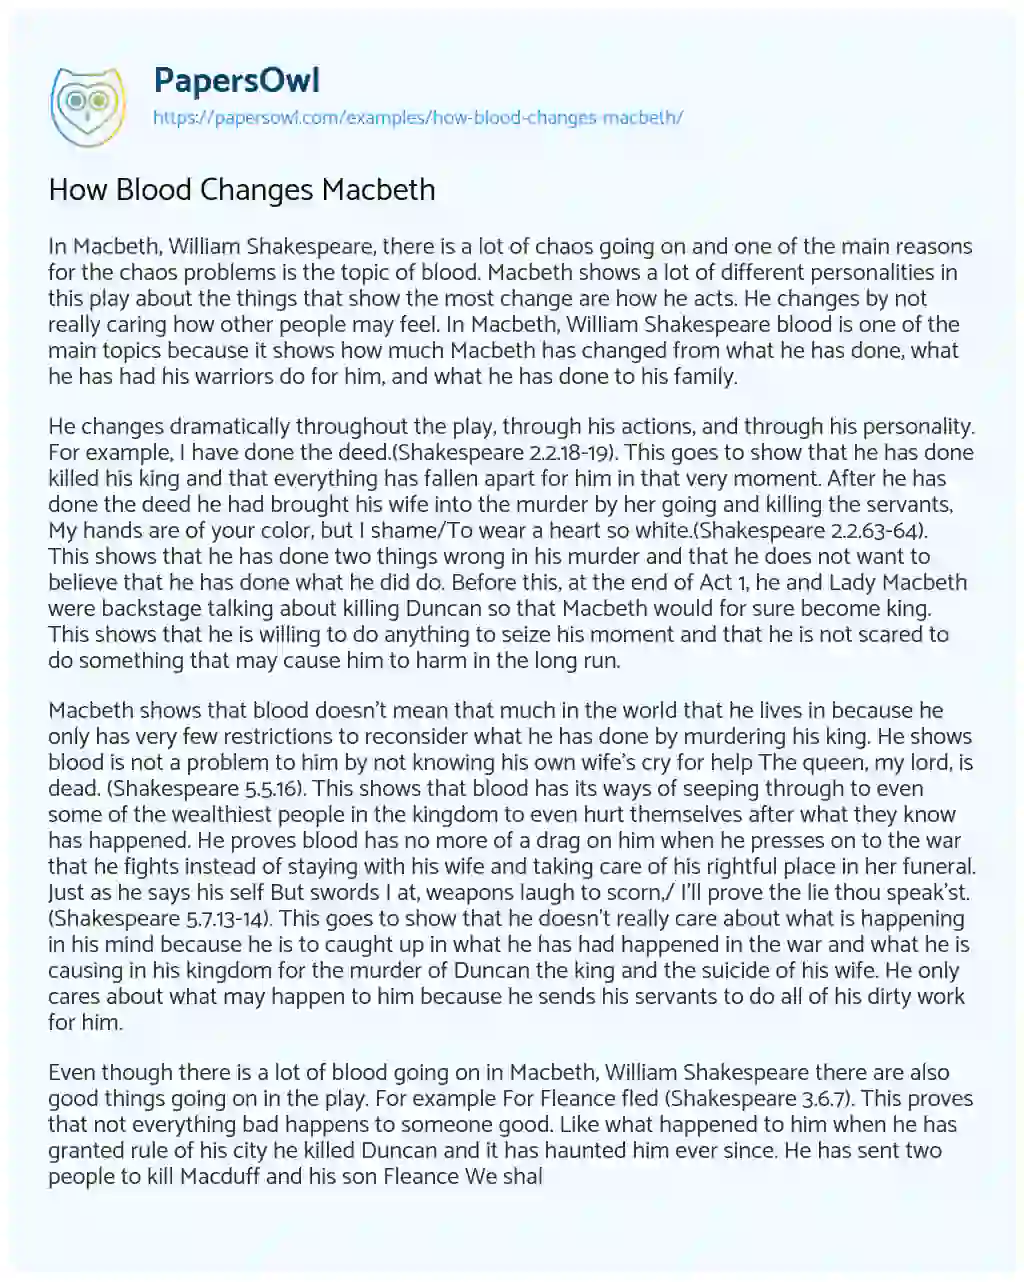 Essay on How Blood Changes Macbeth